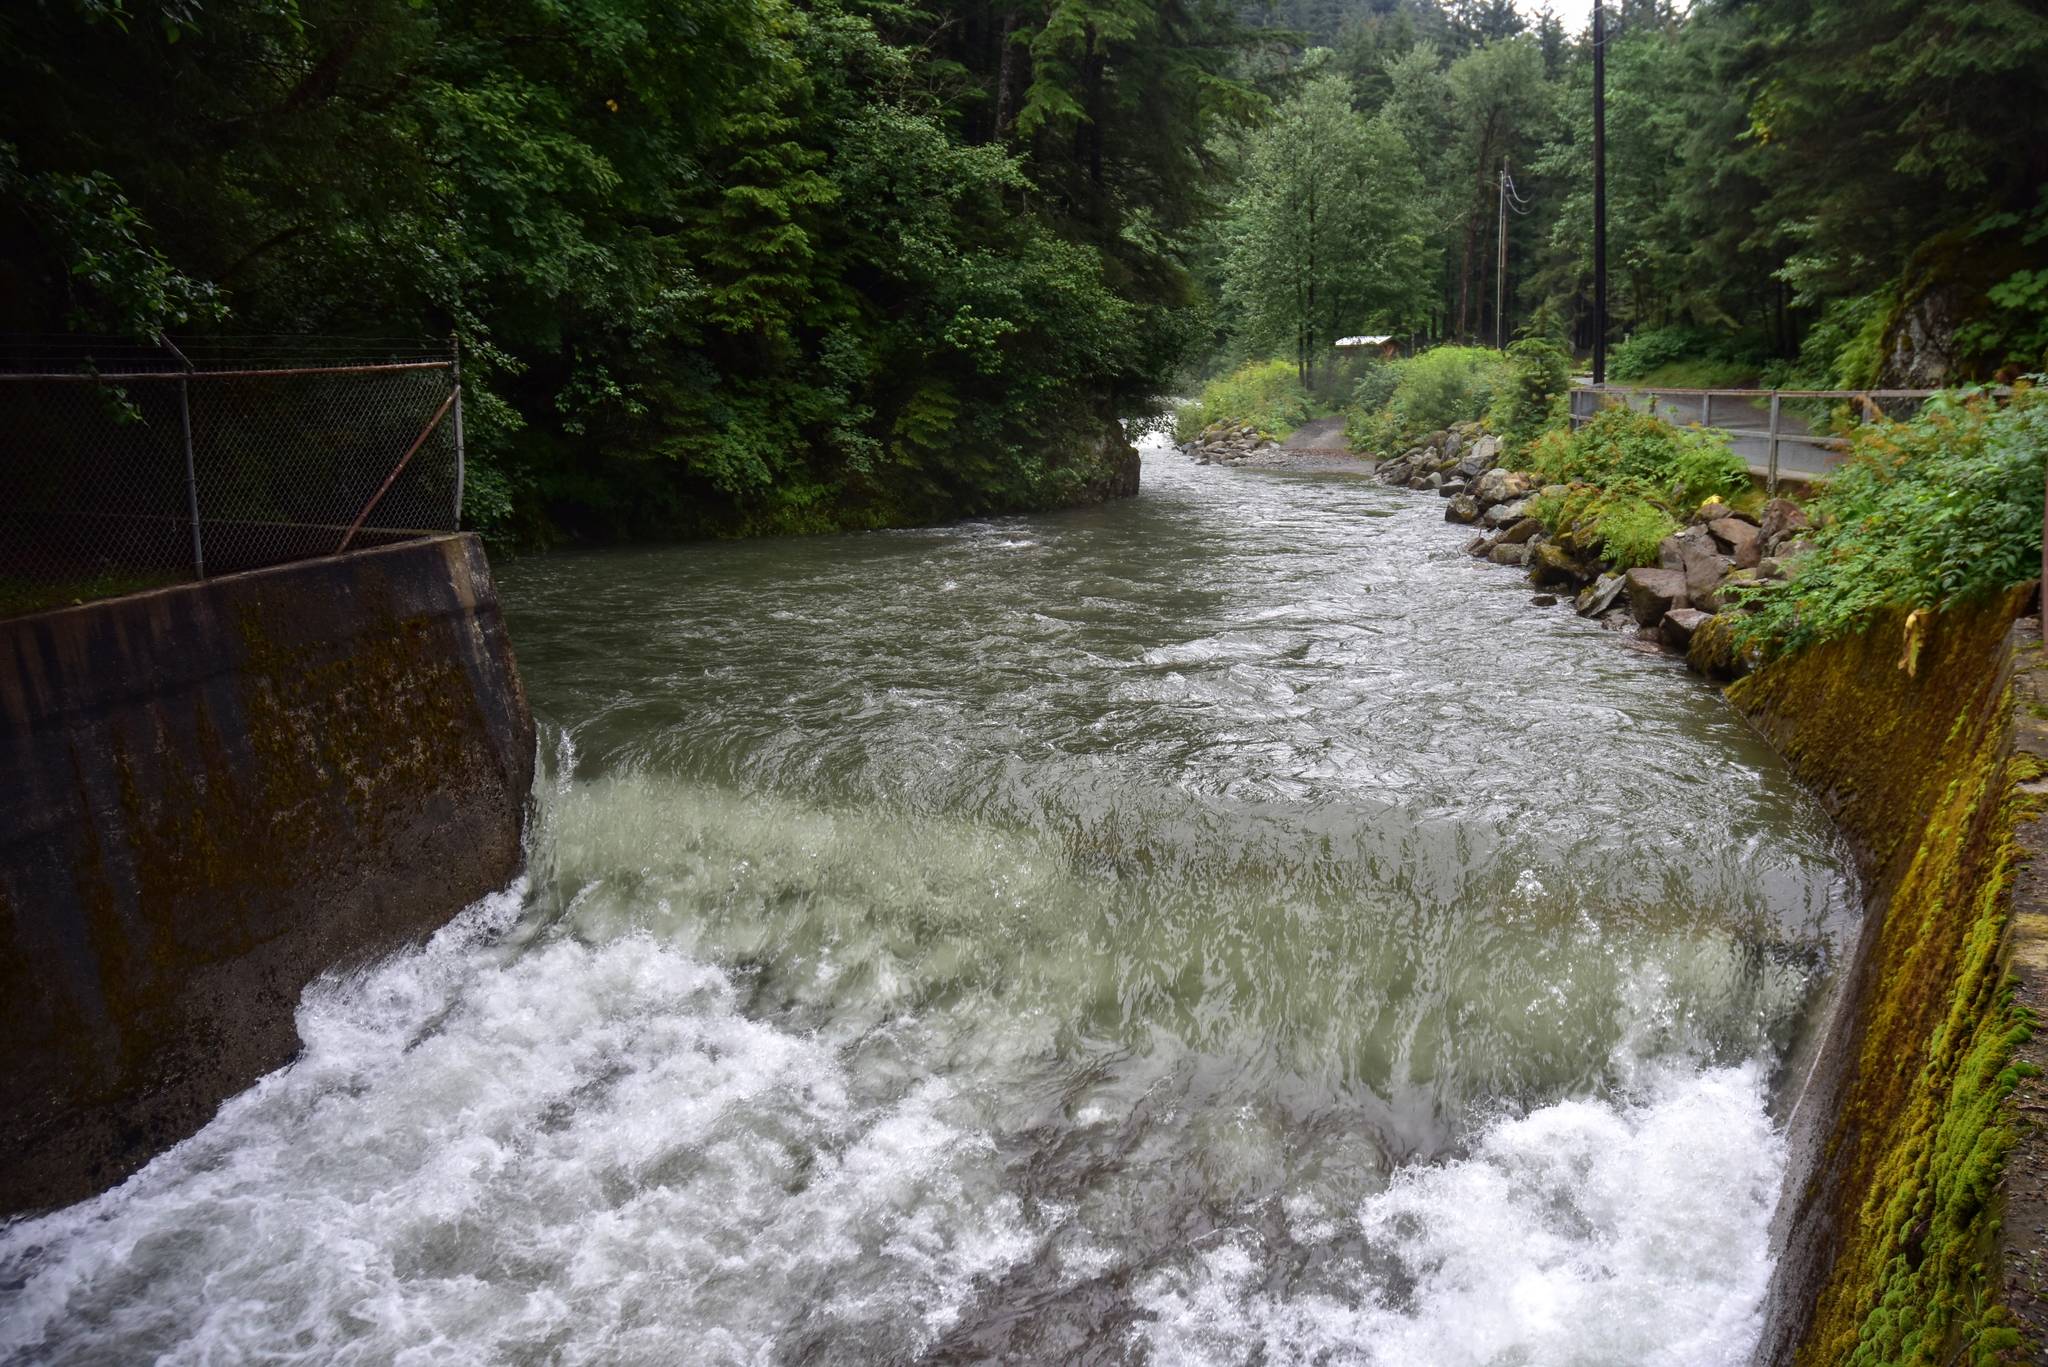 Peter Segall / Juneau Empire                                 Gold Creek in Cope Park was flowing fast Monday, July 27, 2020. The National Weather Service said more rain was expected at the weekend, but that things should clear up mid-week.